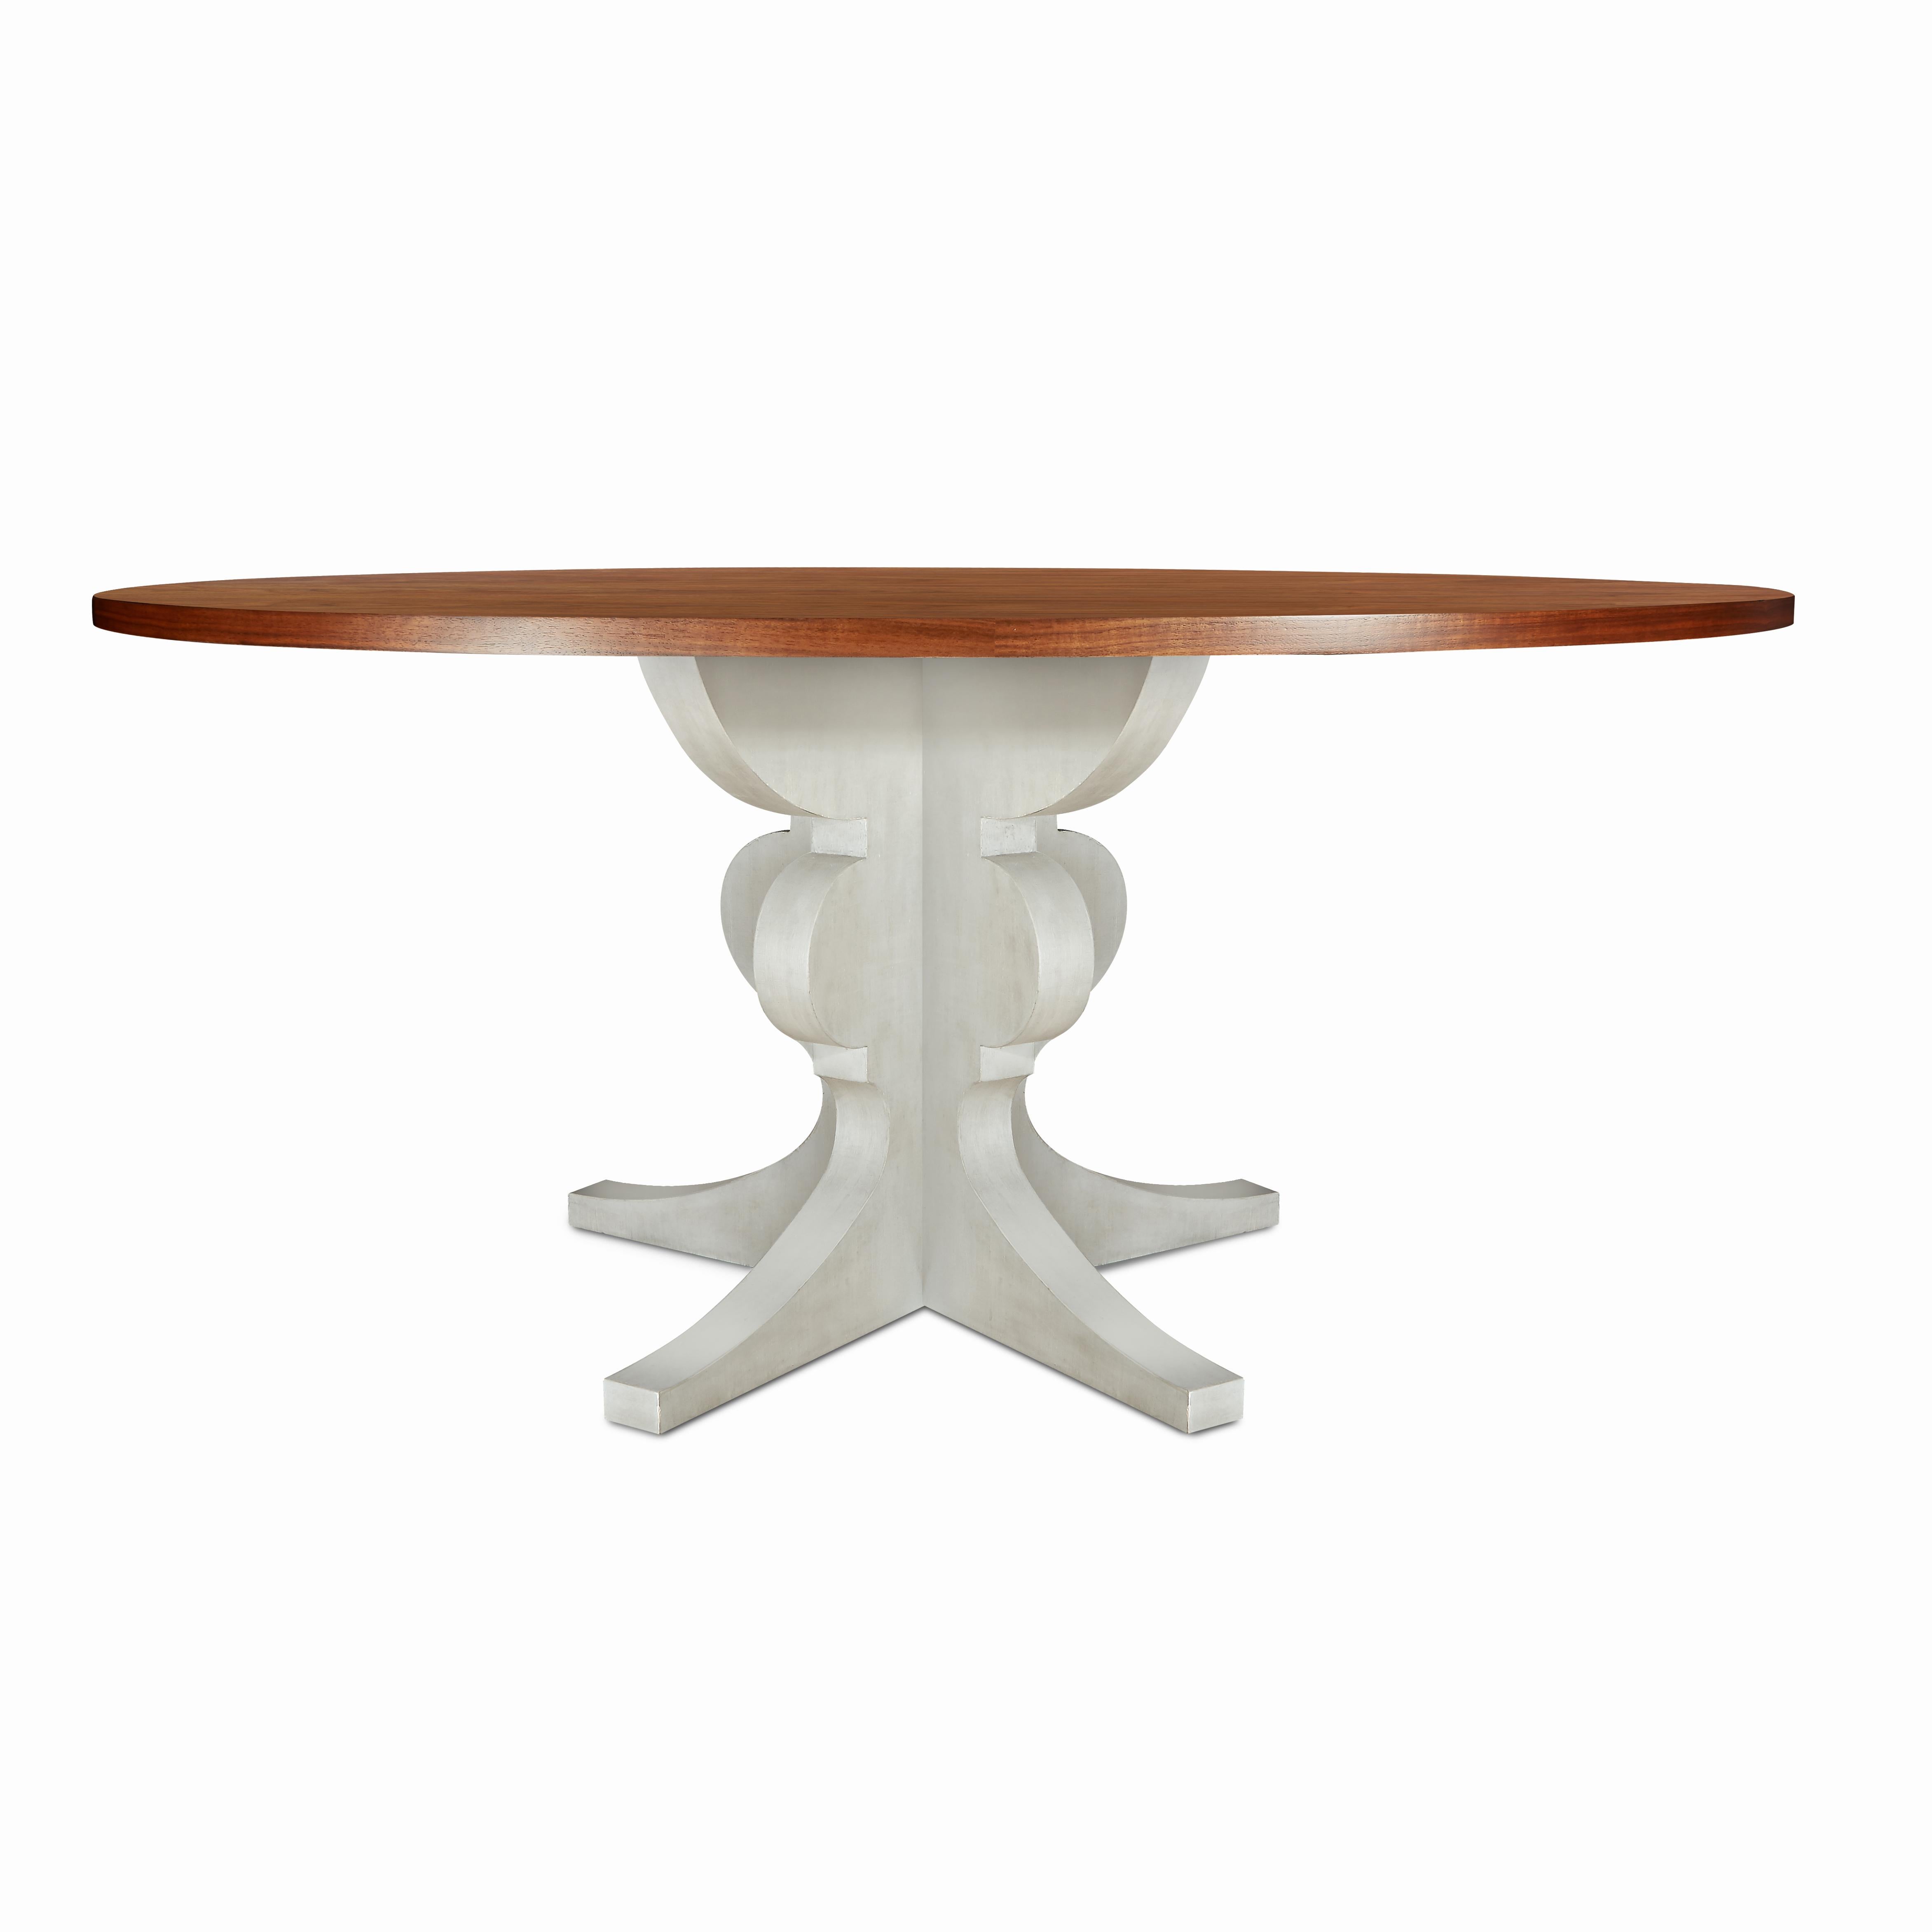 Banishing excessive detail in favor of bold profiles, our Beacham dining table base is an elegant story of a recombinated quatrefoil, a curvaceous sequence terminating in streamlined feet. The beautiful plain-sawn grained top adds an extra level of